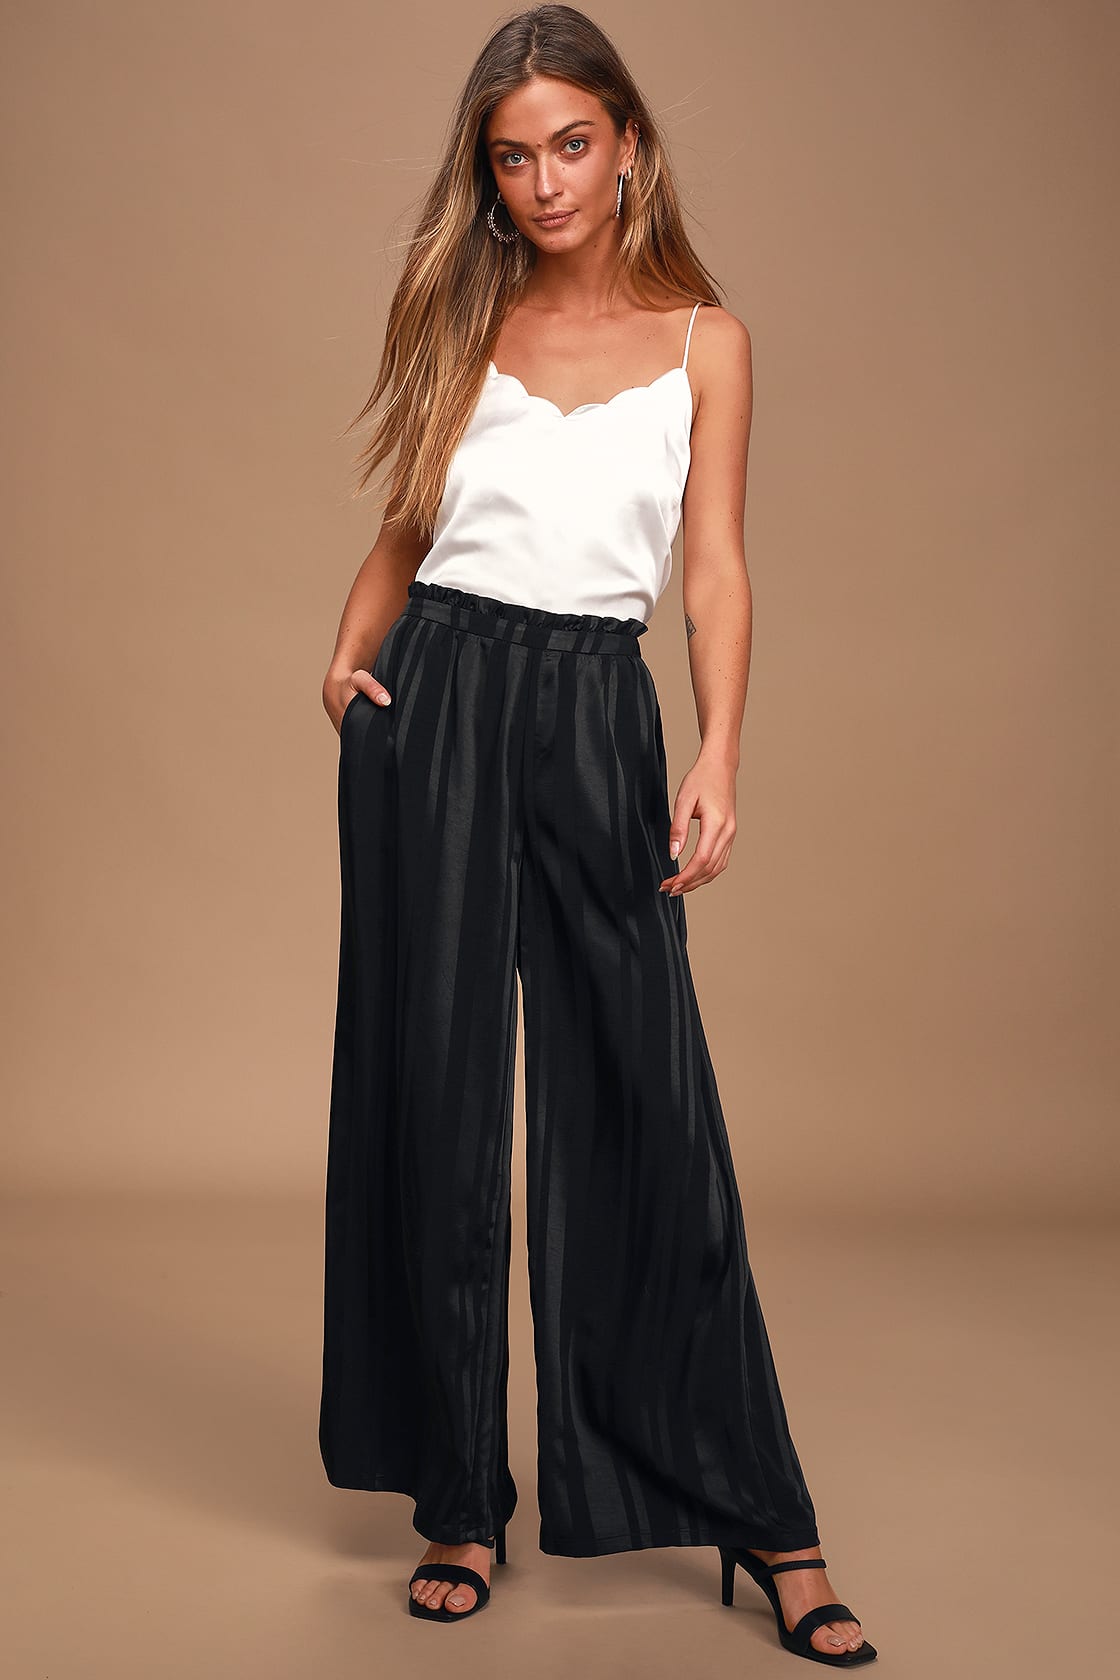 Chic Black Striped Pants - Cropped Pants - High-Waisted Pants - Lulus